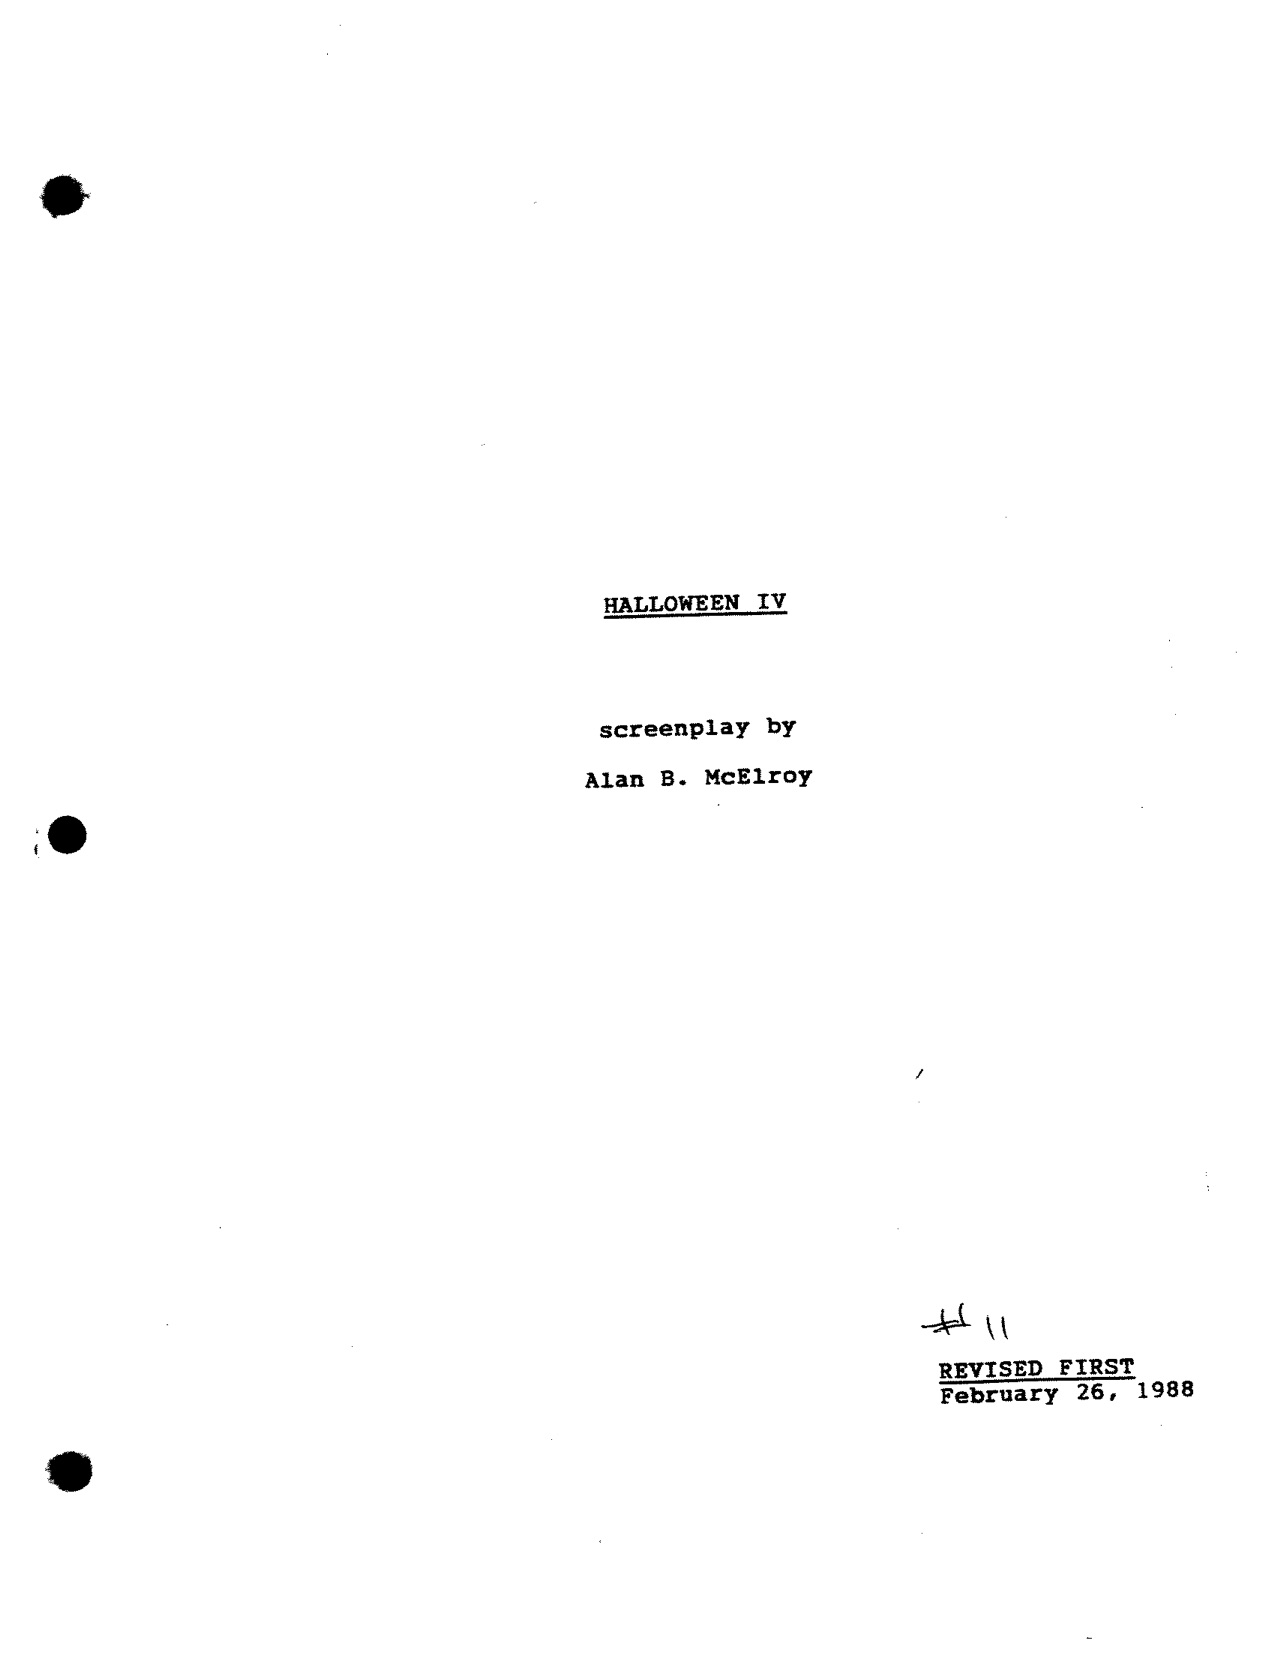 Halloween 4: The Return of Michael Myers (1988) - Revised First Draft